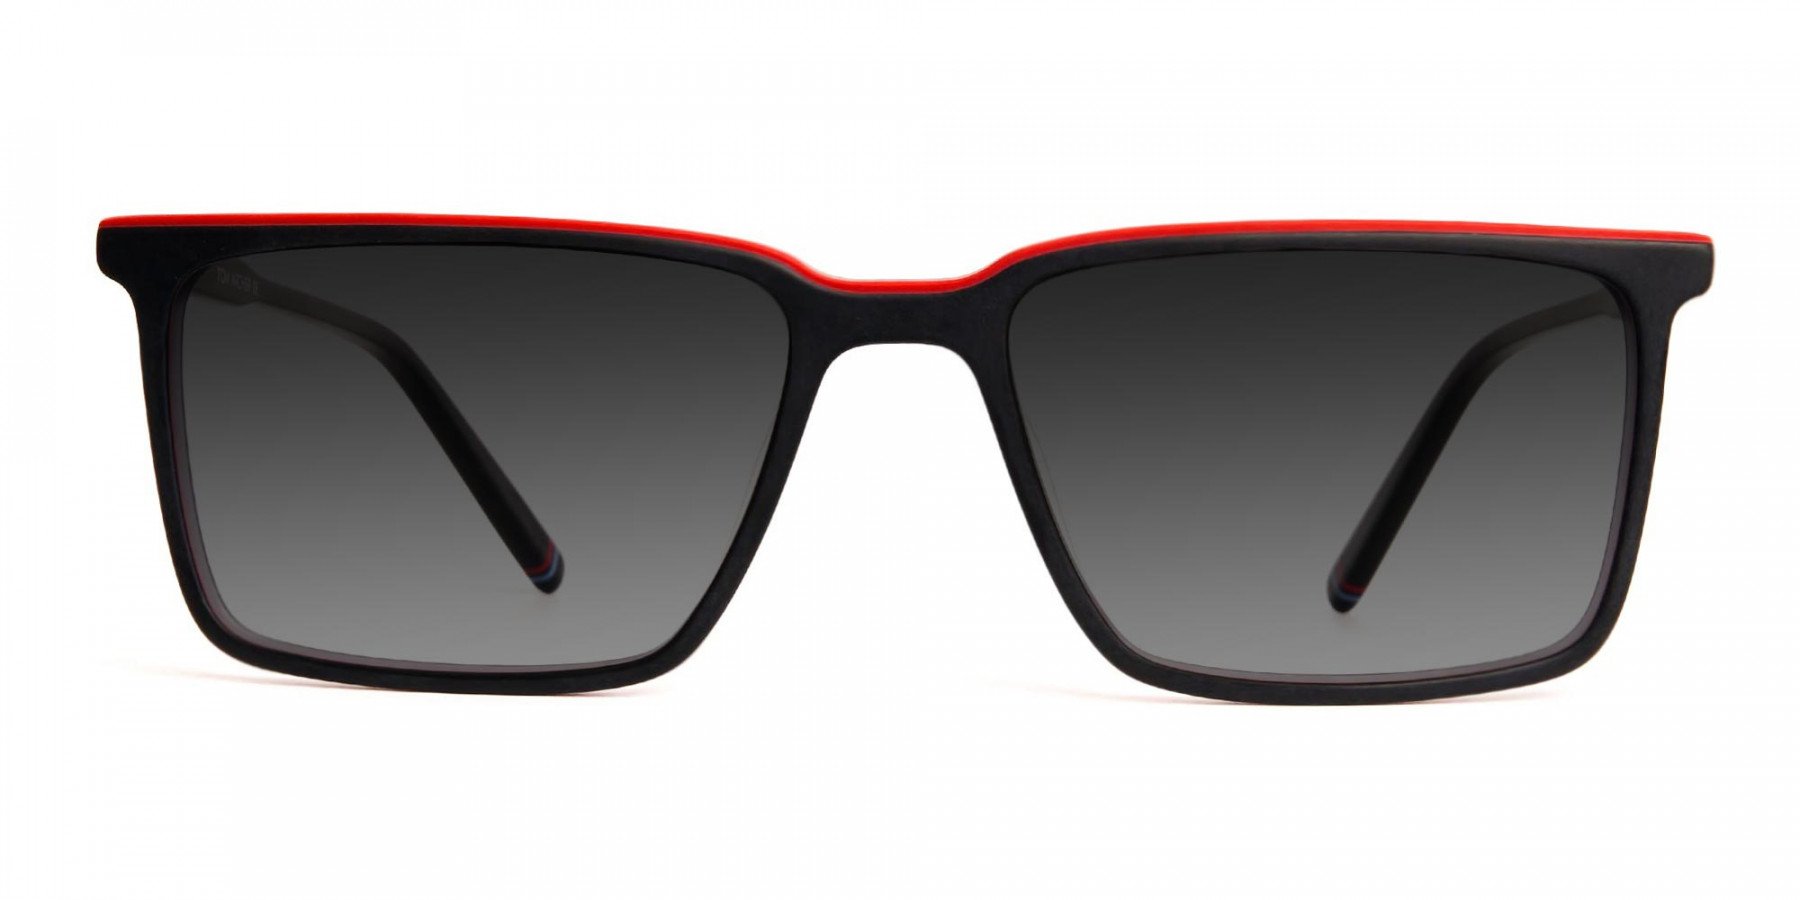 black-and-red-rectangular-grey-tinted-sunglasses-frames-1